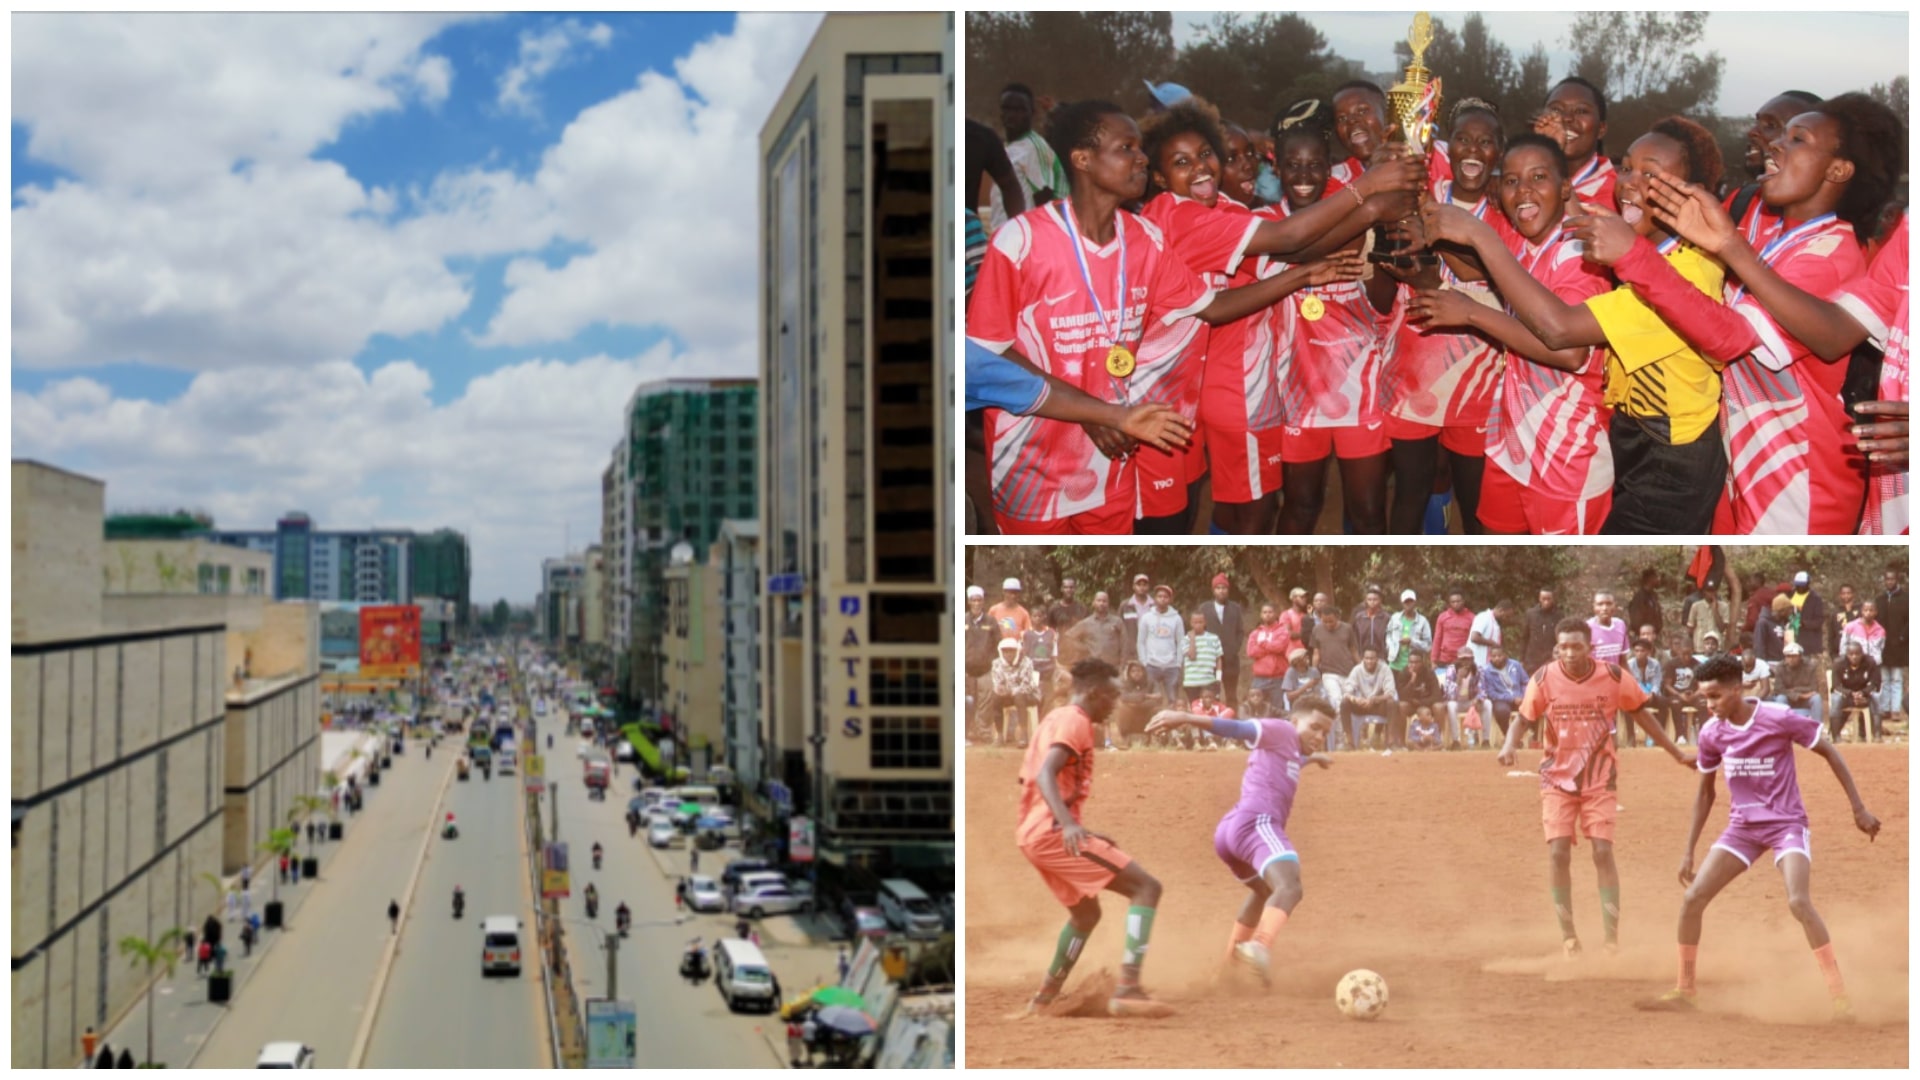 Eastleigh: A hub of sporting passion in the heart of Nairobi